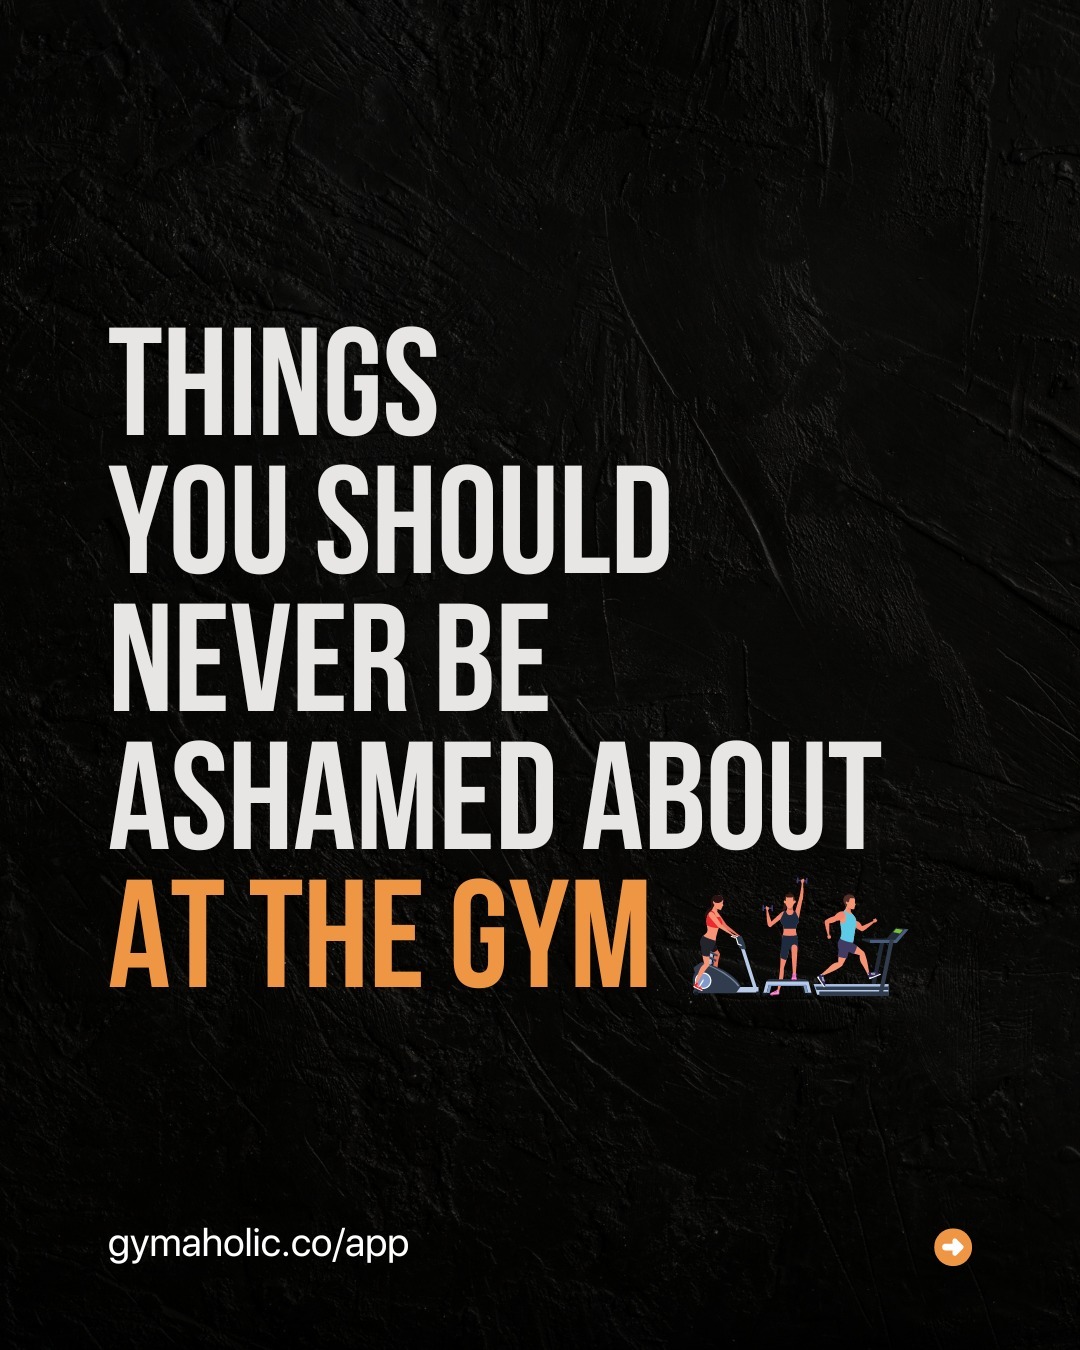 Things you should never be ashamed about at the gym